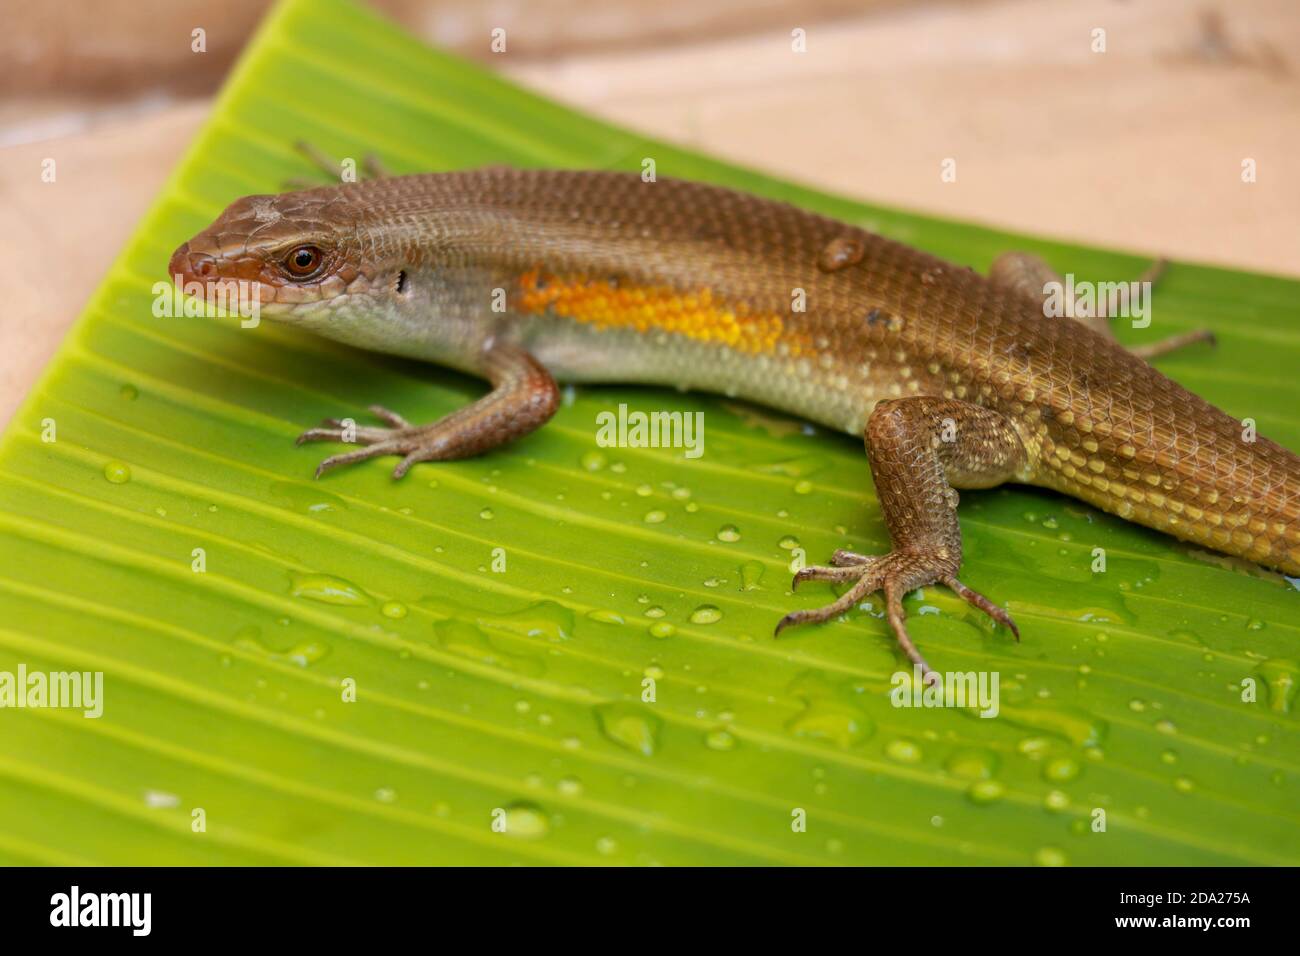 Balinese Skink. Lizard Eutropis multifasciata on a wet green leaf between water camps. Most species of skinks have long, tapering tails that they can Stock Photo